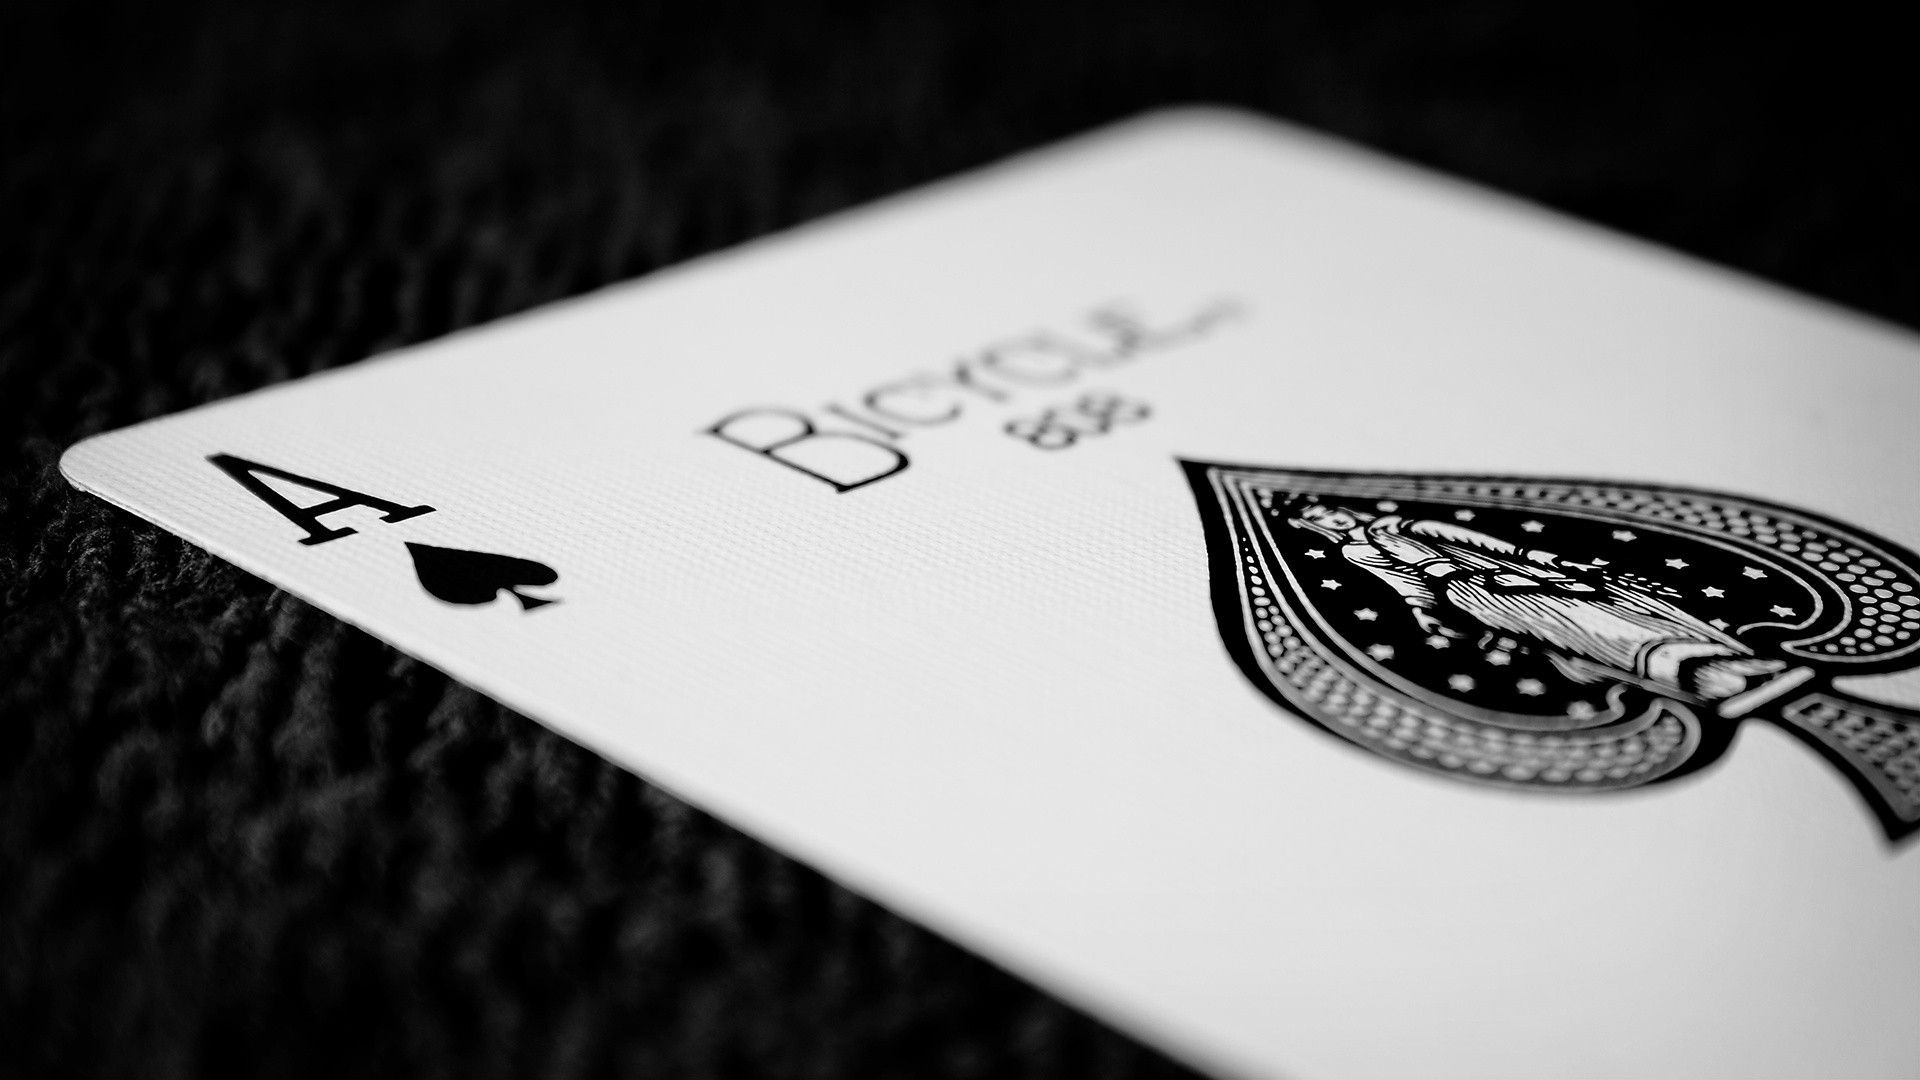 HD wallpaper queen suited queen jack poker playing cards black card   Wallpaper Flare